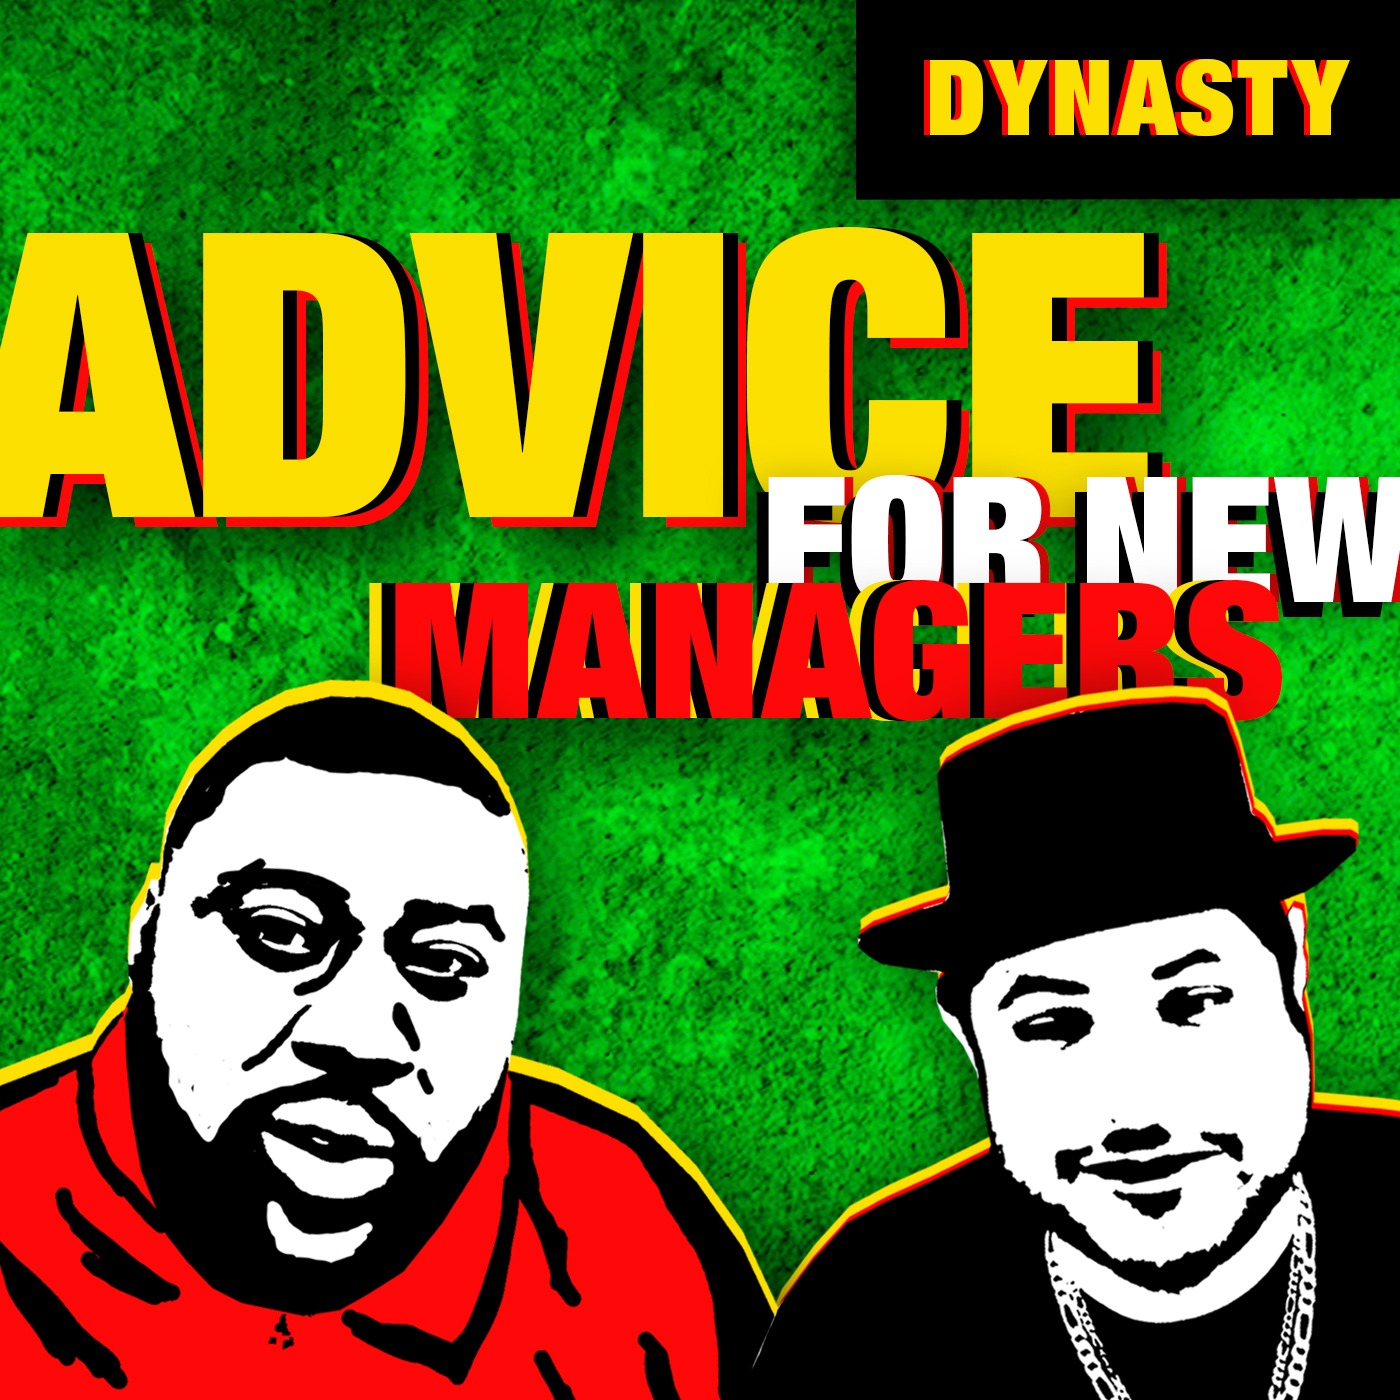 Advice for New Dynasty Managers | Dynasty Fantasy Football Image